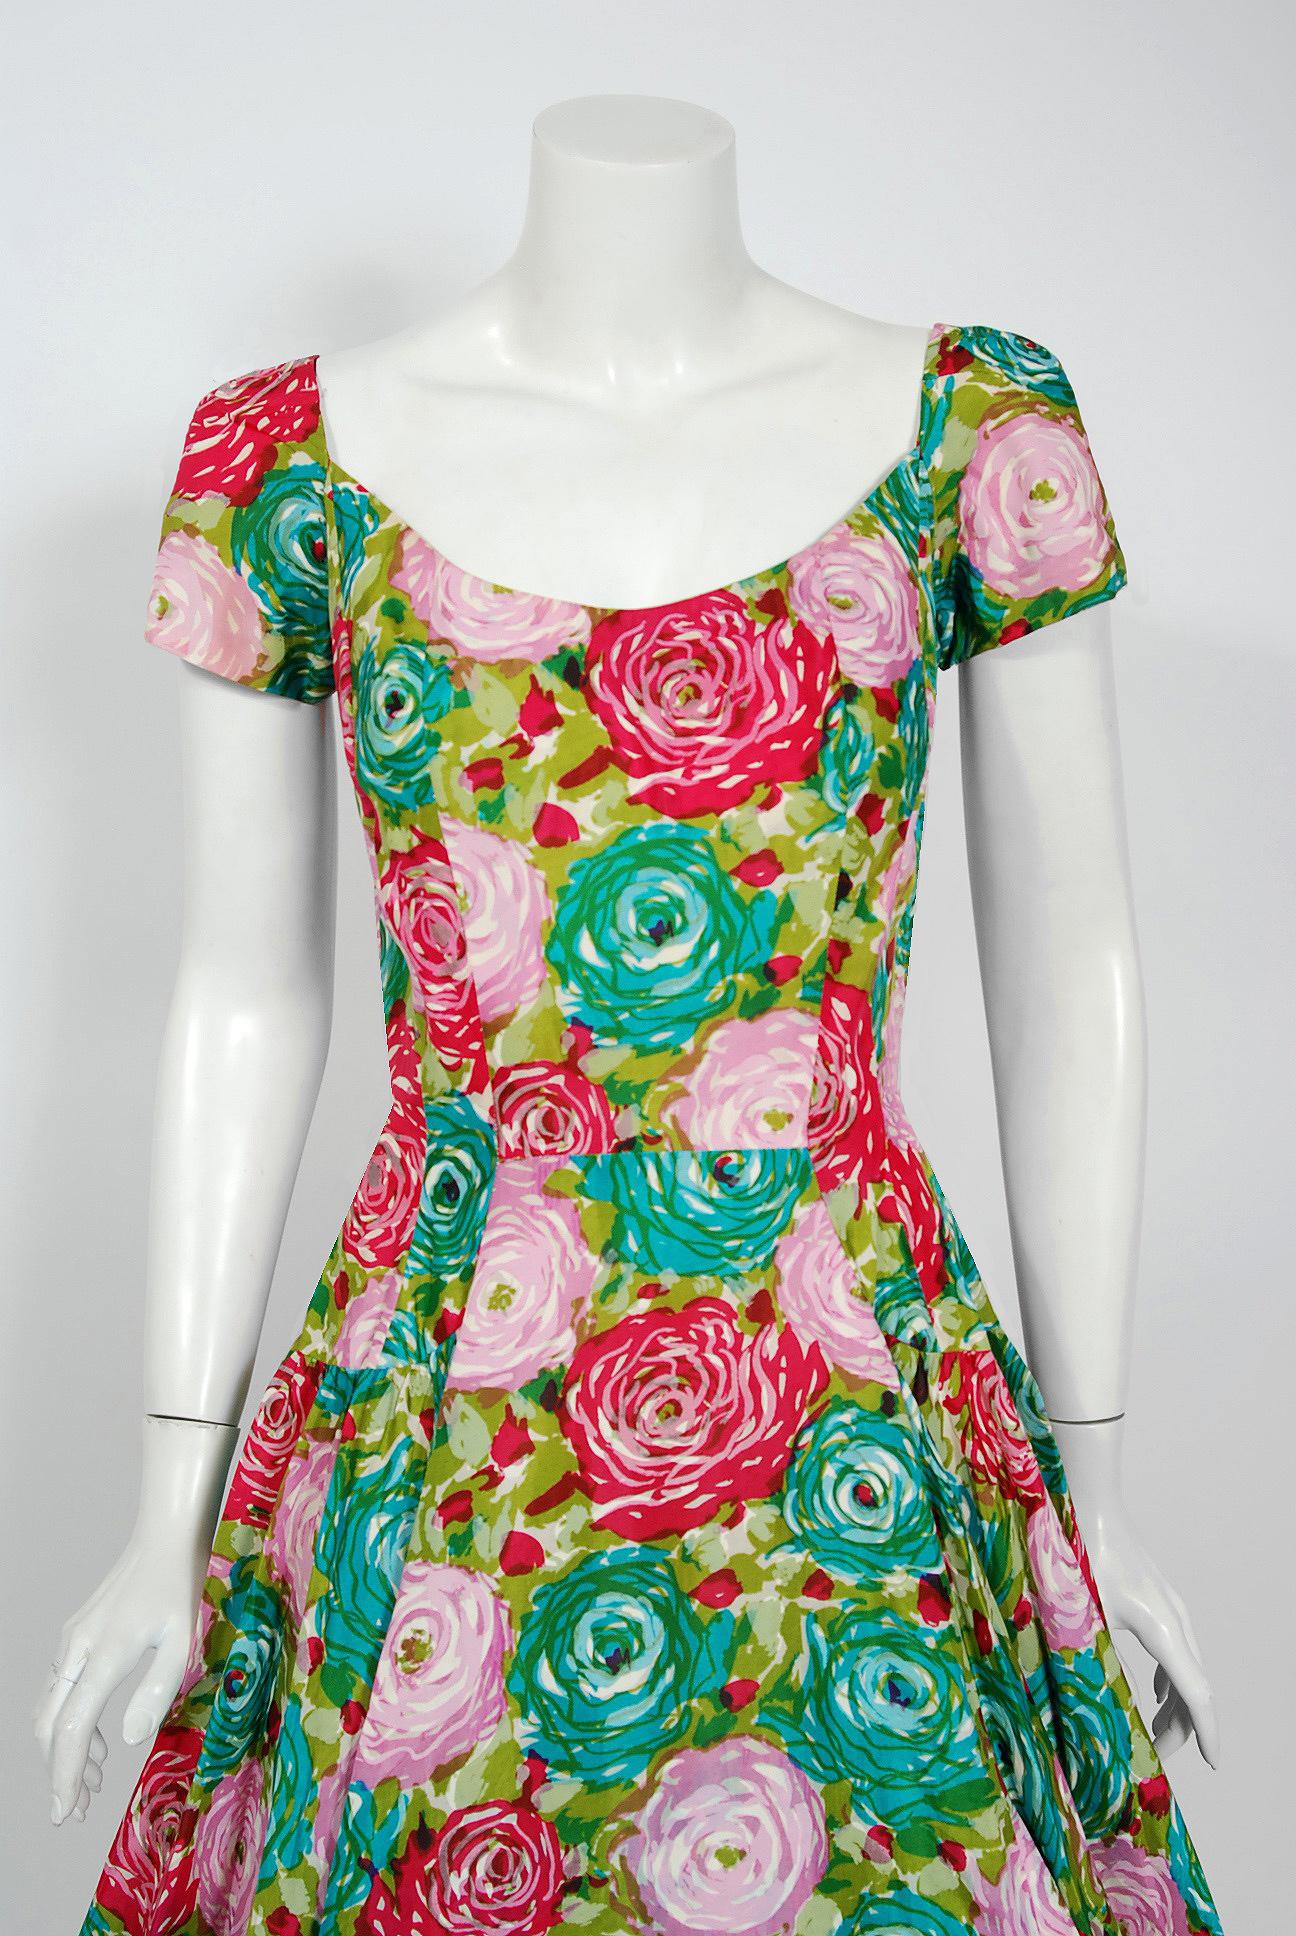 This Perullo for David Hart designer show-stopper is one of the most alluring and flattering 1950's garden party dresses I have ever seen. Fashioned from a 